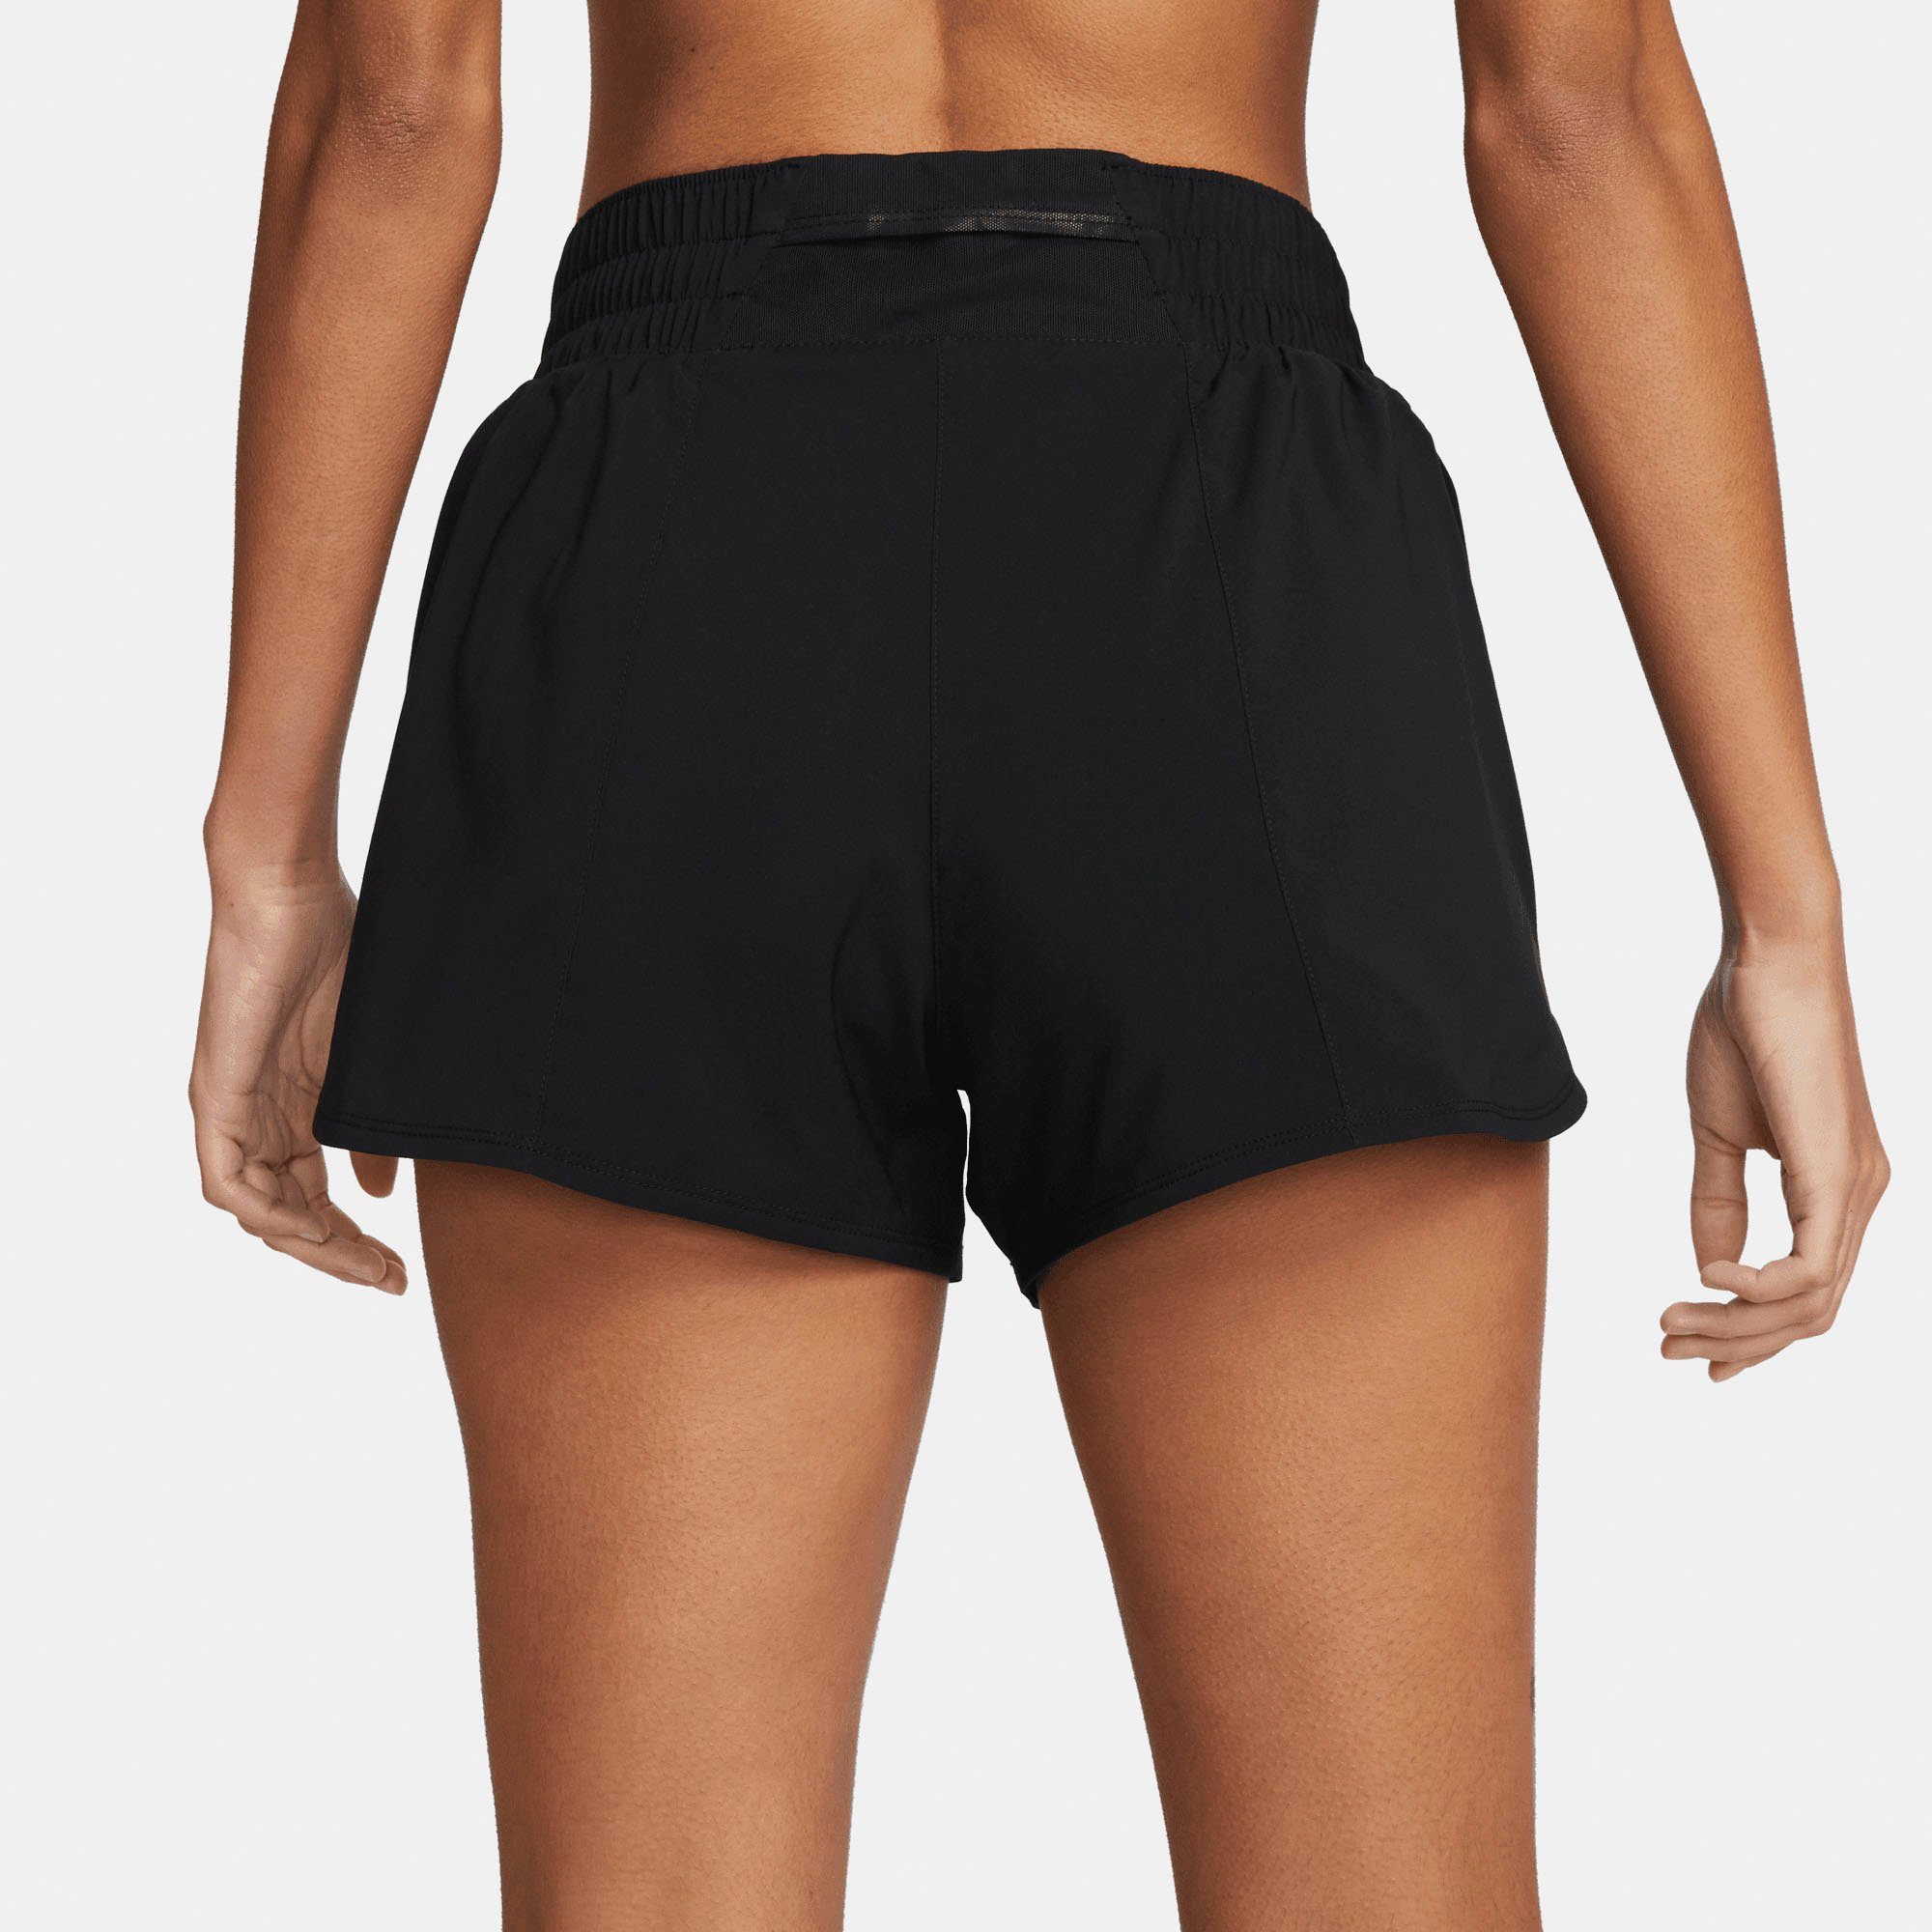 Nike Trainingsshorts WOMEN'S BRIEF-LINED BLACK/REFLECTIVE SILV MID-RISE SHORTS ONE DRI-FIT